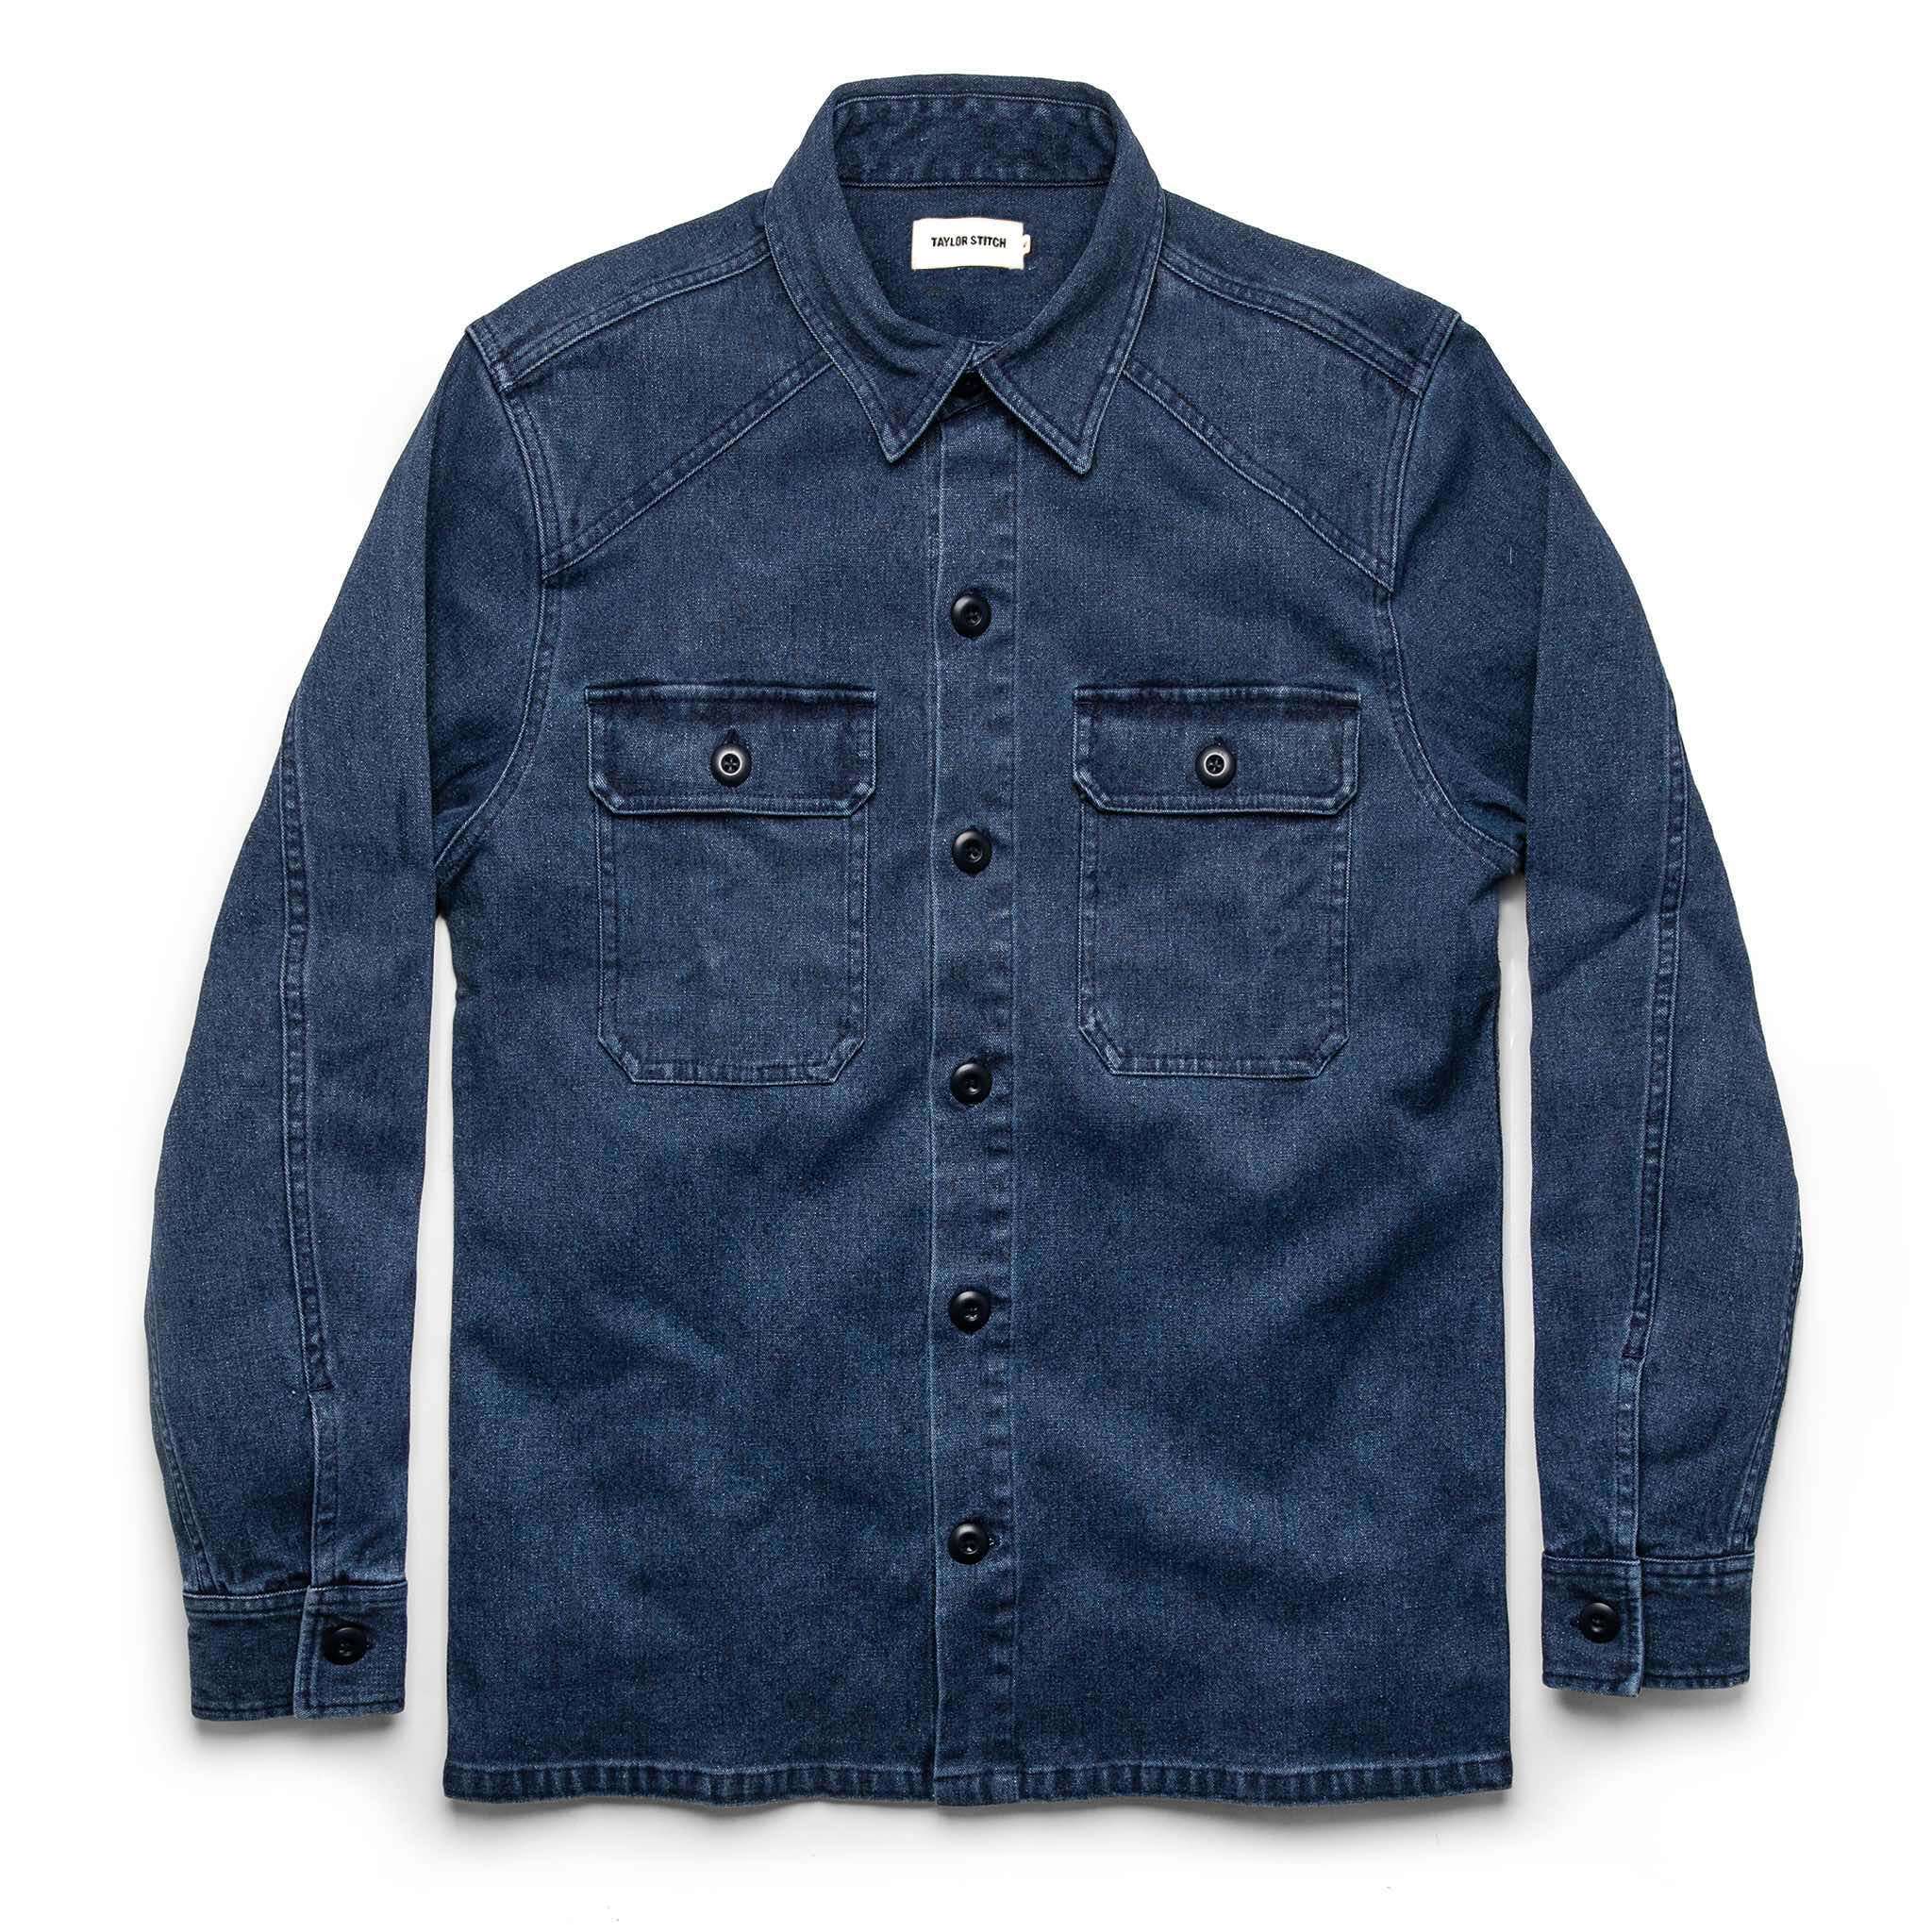 The Emerson Jacket in Navy Double Cloth | Taylor Stitch…